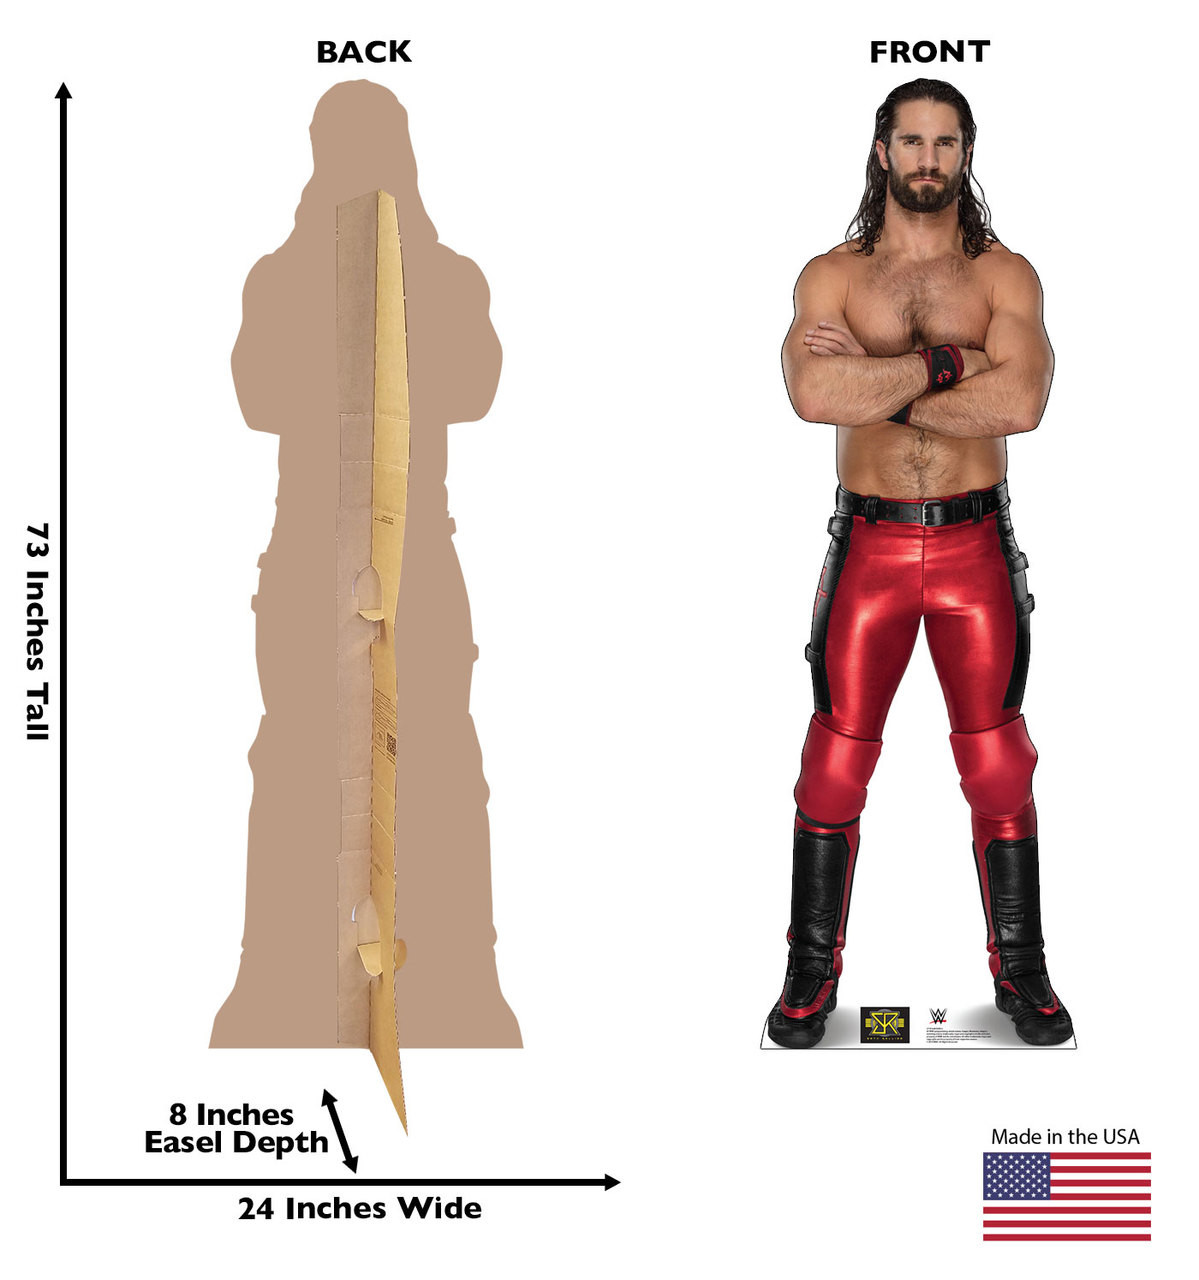 Seth Rollins Cardboard Cutout Life-size cardboard standee front and back with dimensions